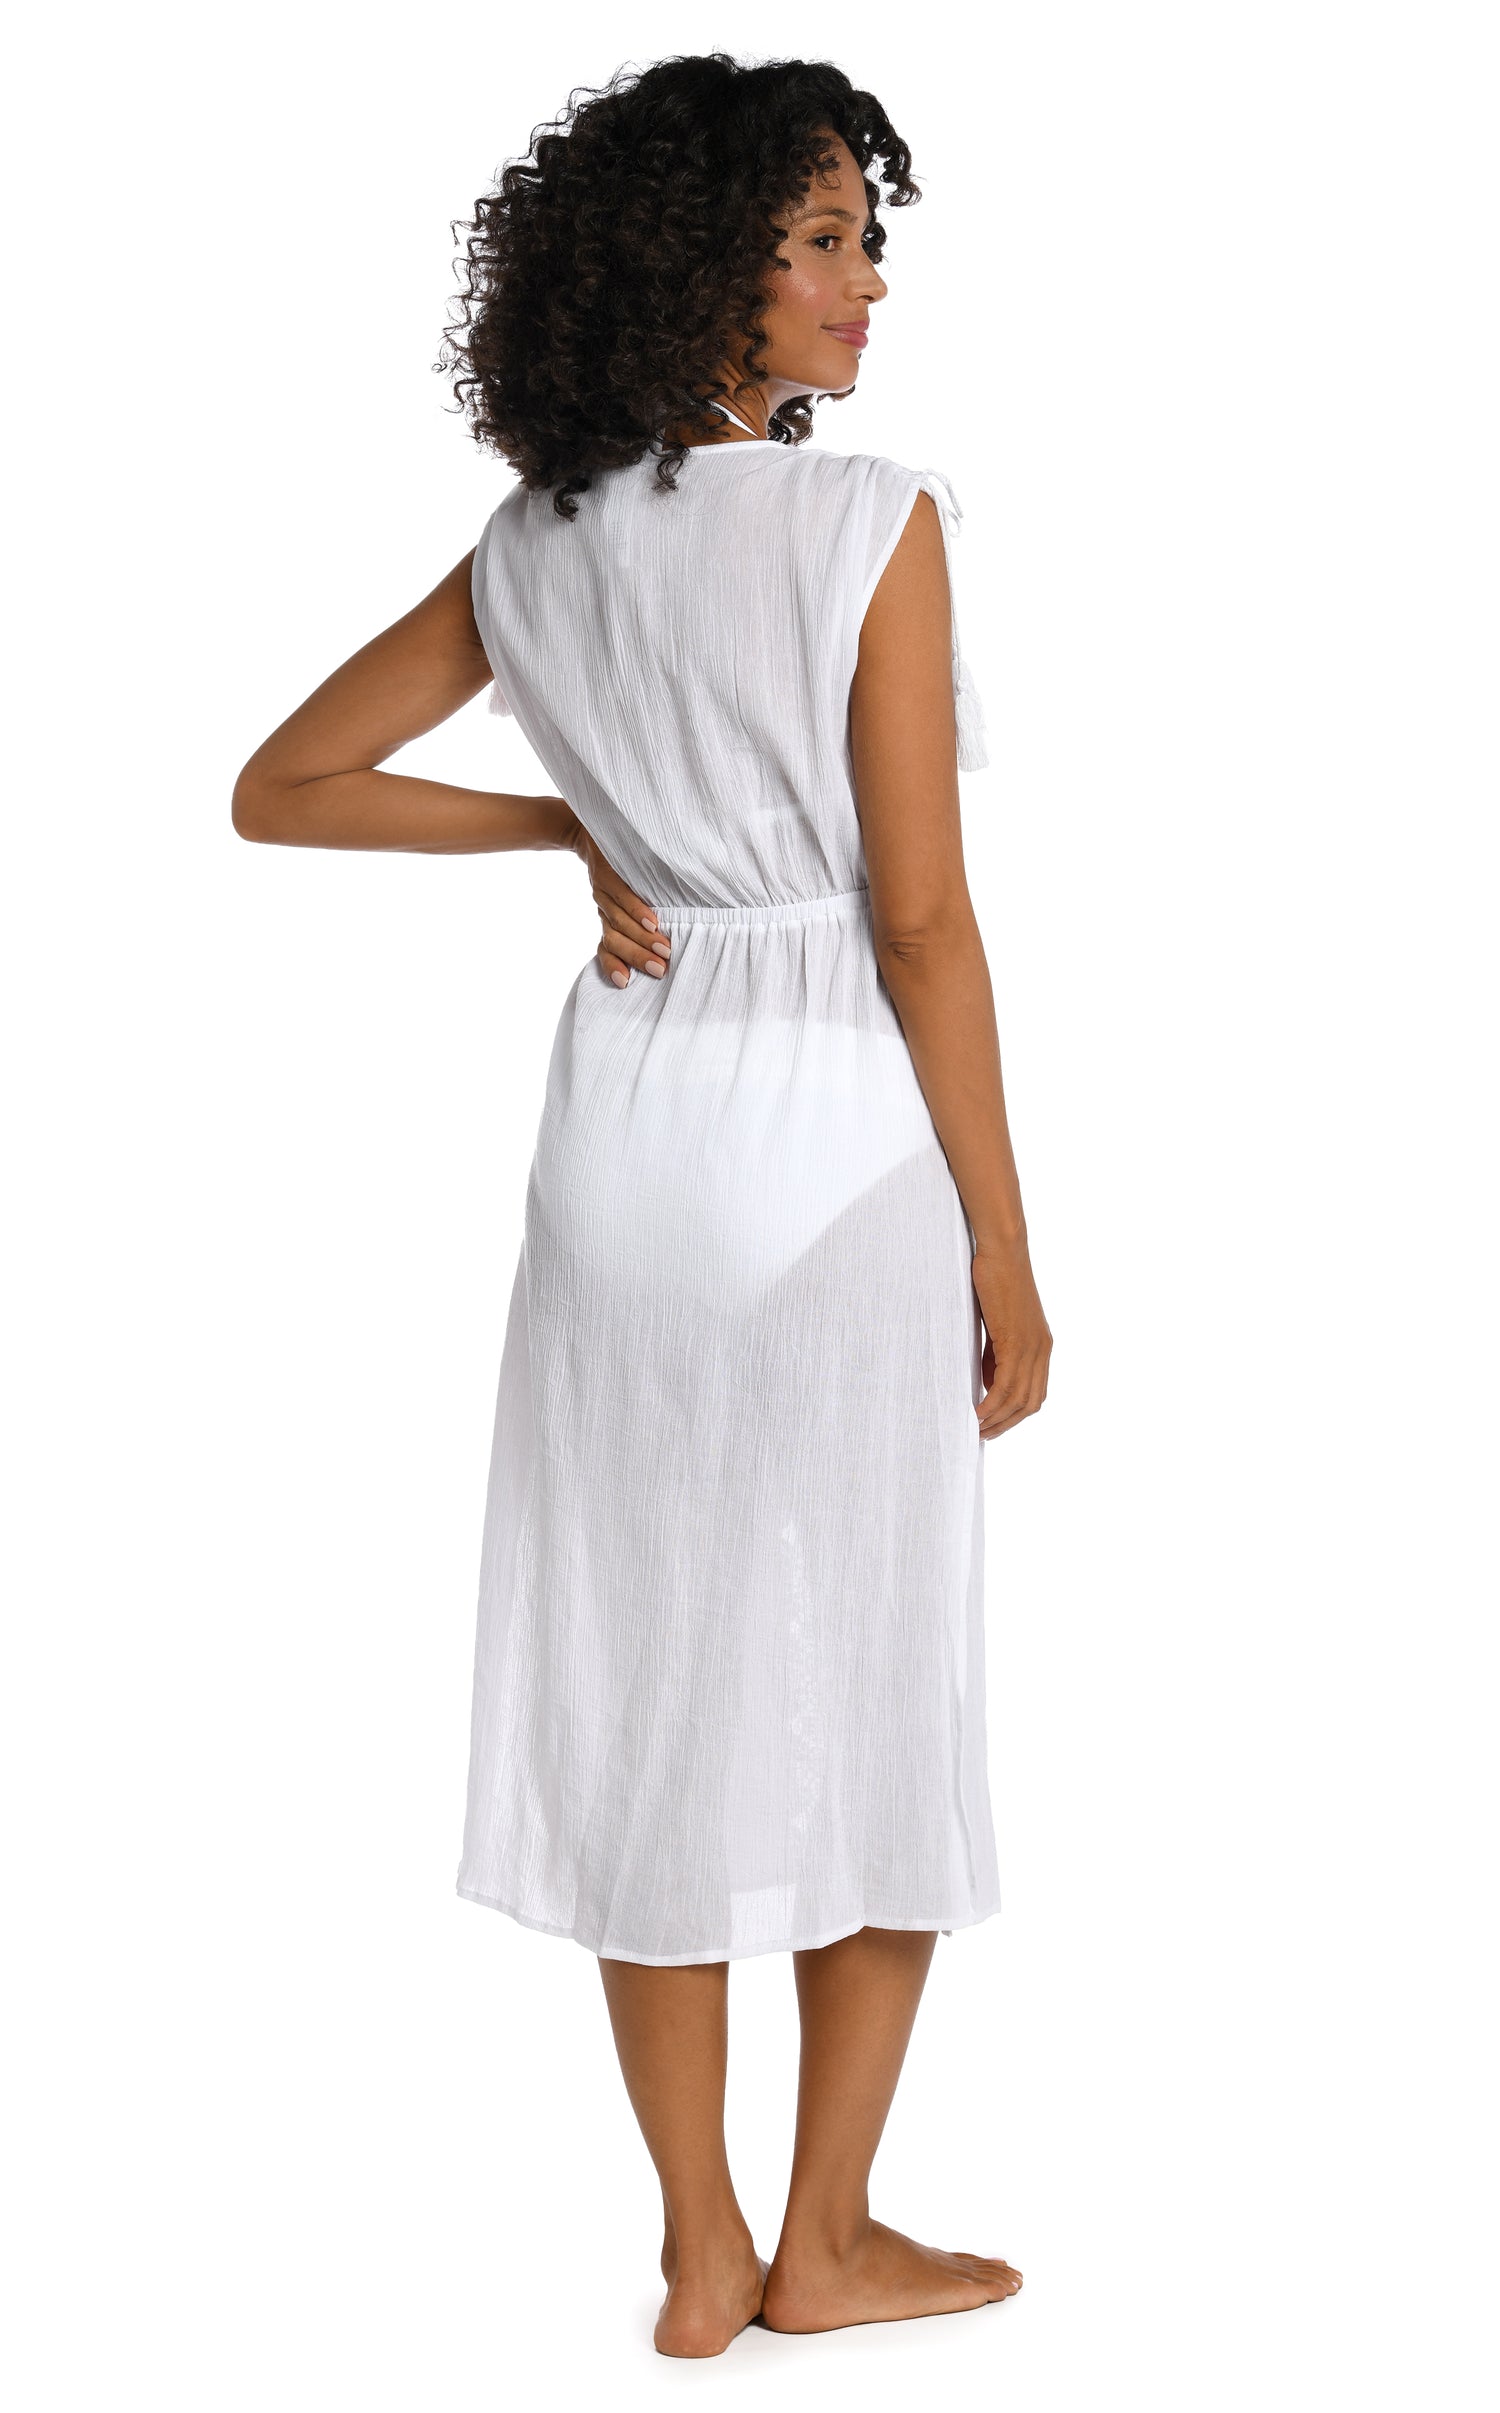 Model is wearing a white mid-length dress swimsuit cover up from our Island Fare collection.